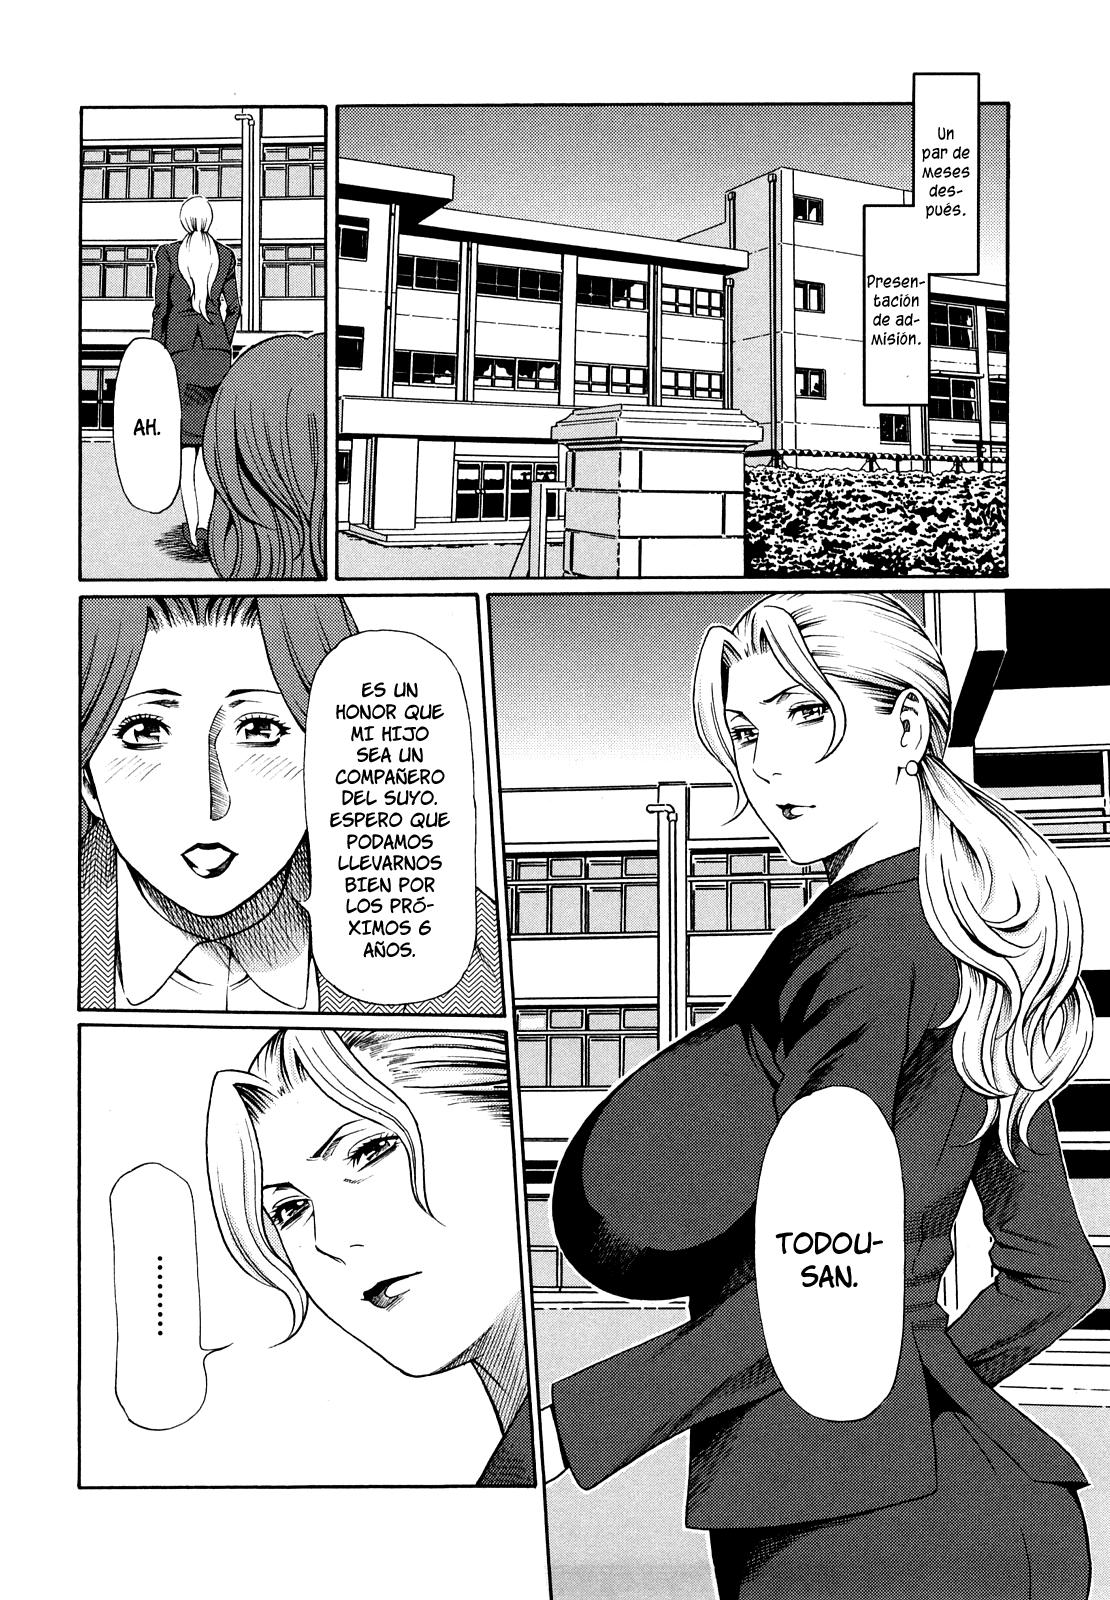 Immorality Love-Hole Completo (Sin Censura) Chapter-7 - 1